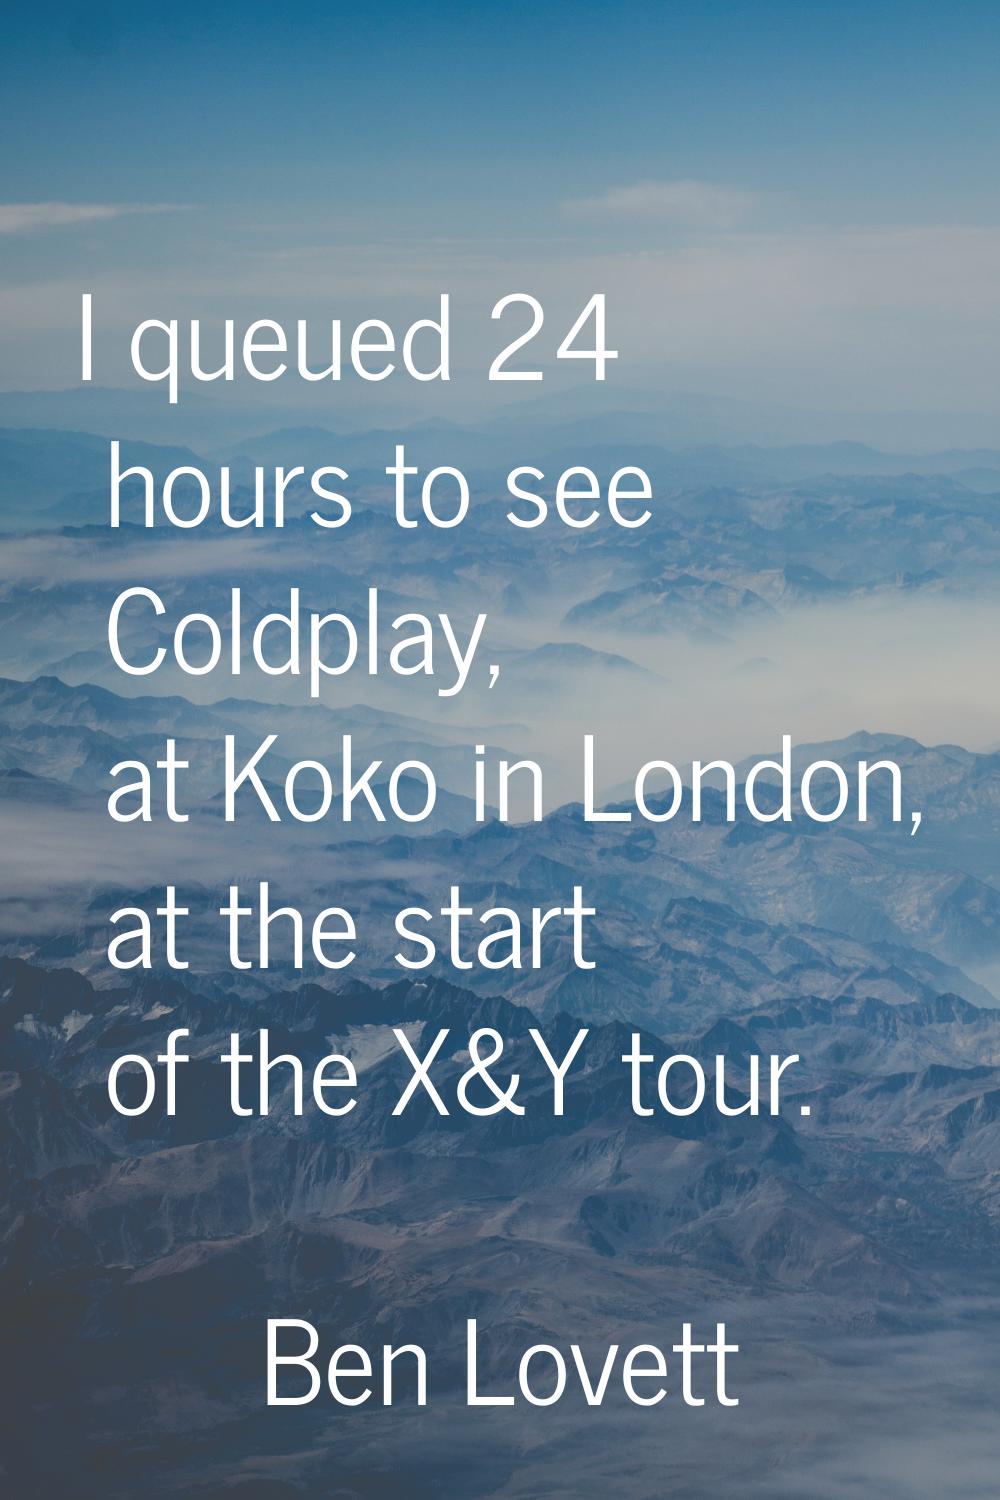 I queued 24 hours to see Coldplay, at Koko in London, at the start of the X&Y tour.